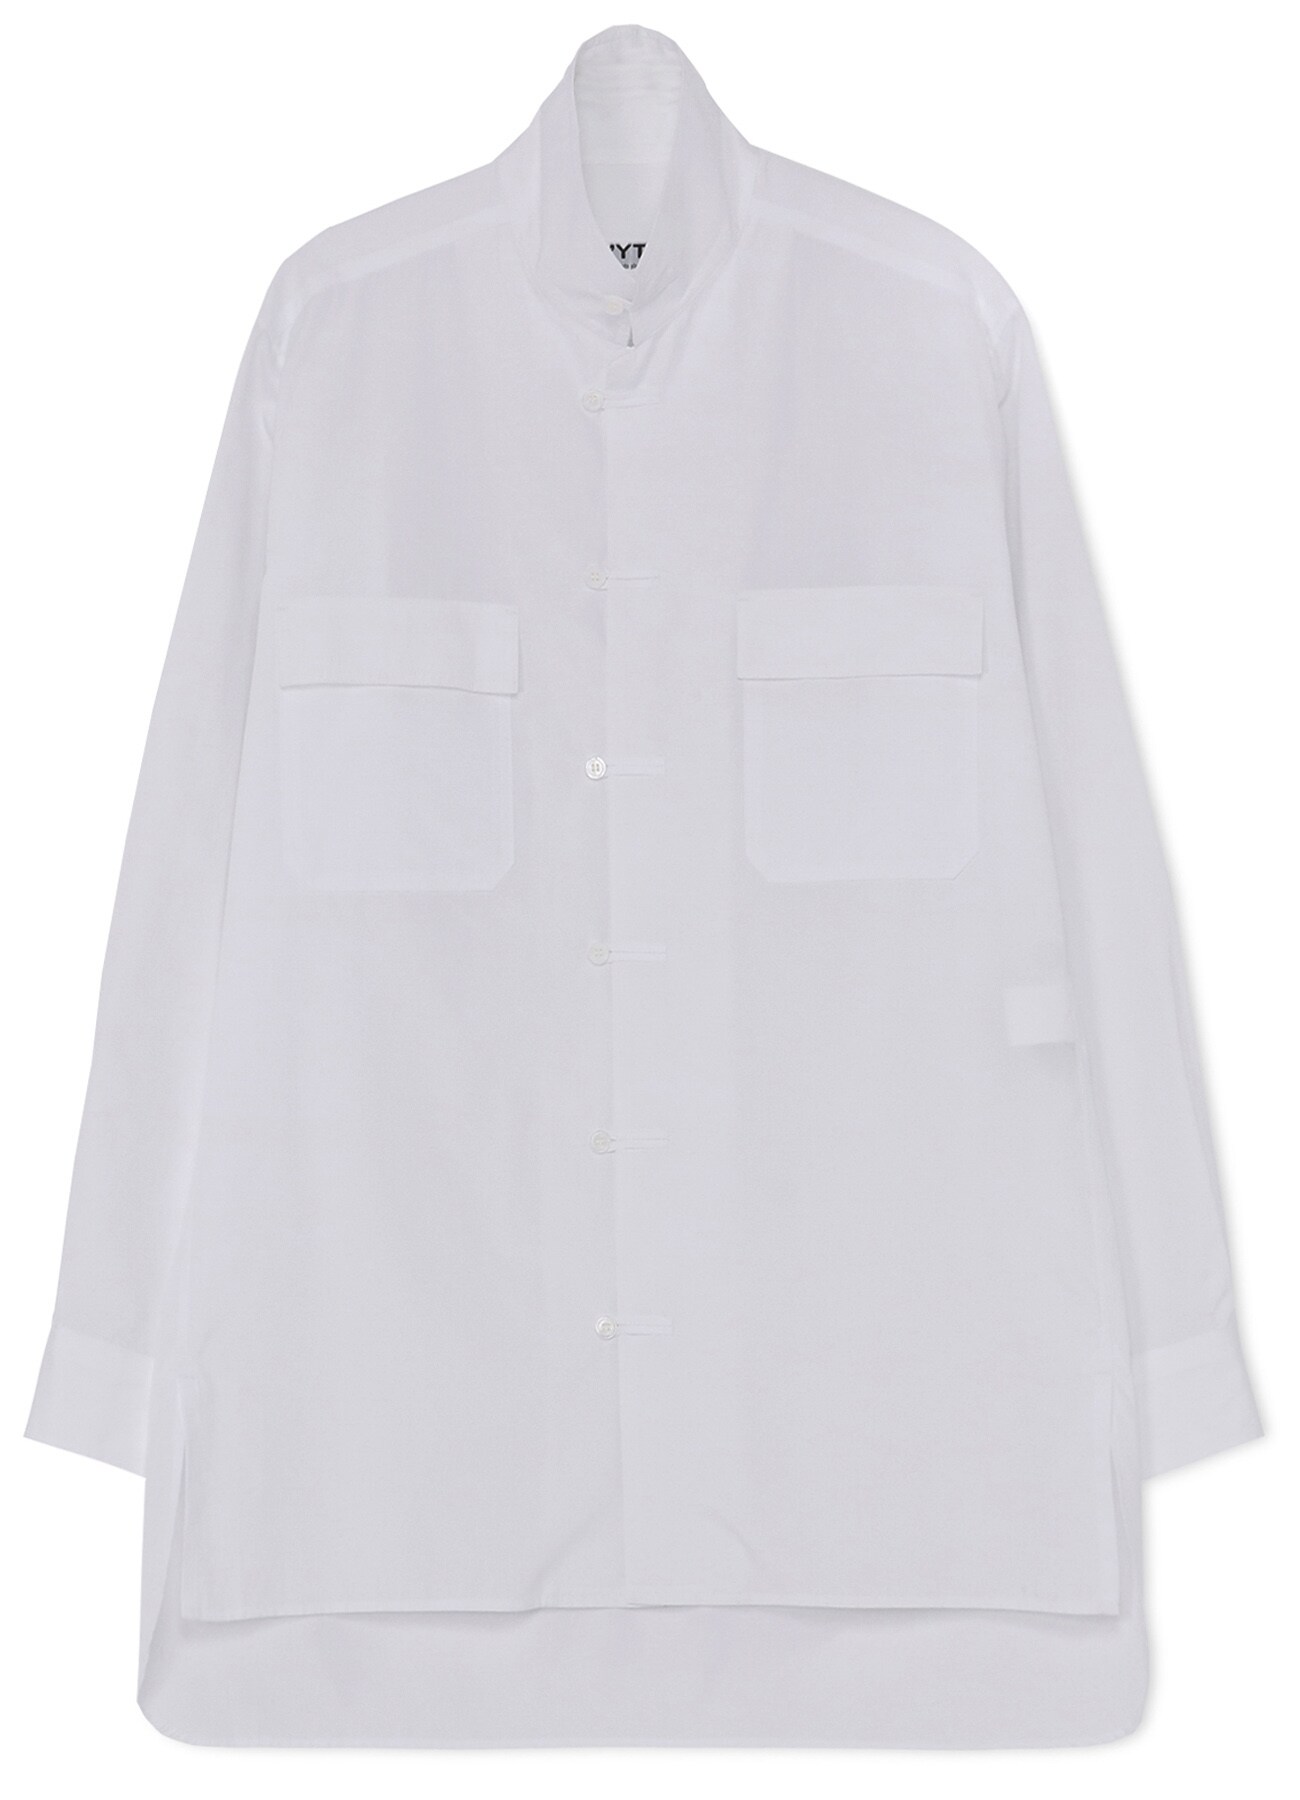 100/2 BROAD SLEEVE TIE OPEN COLLAR SHIRT(M White): S'YTE｜THE SHOP 